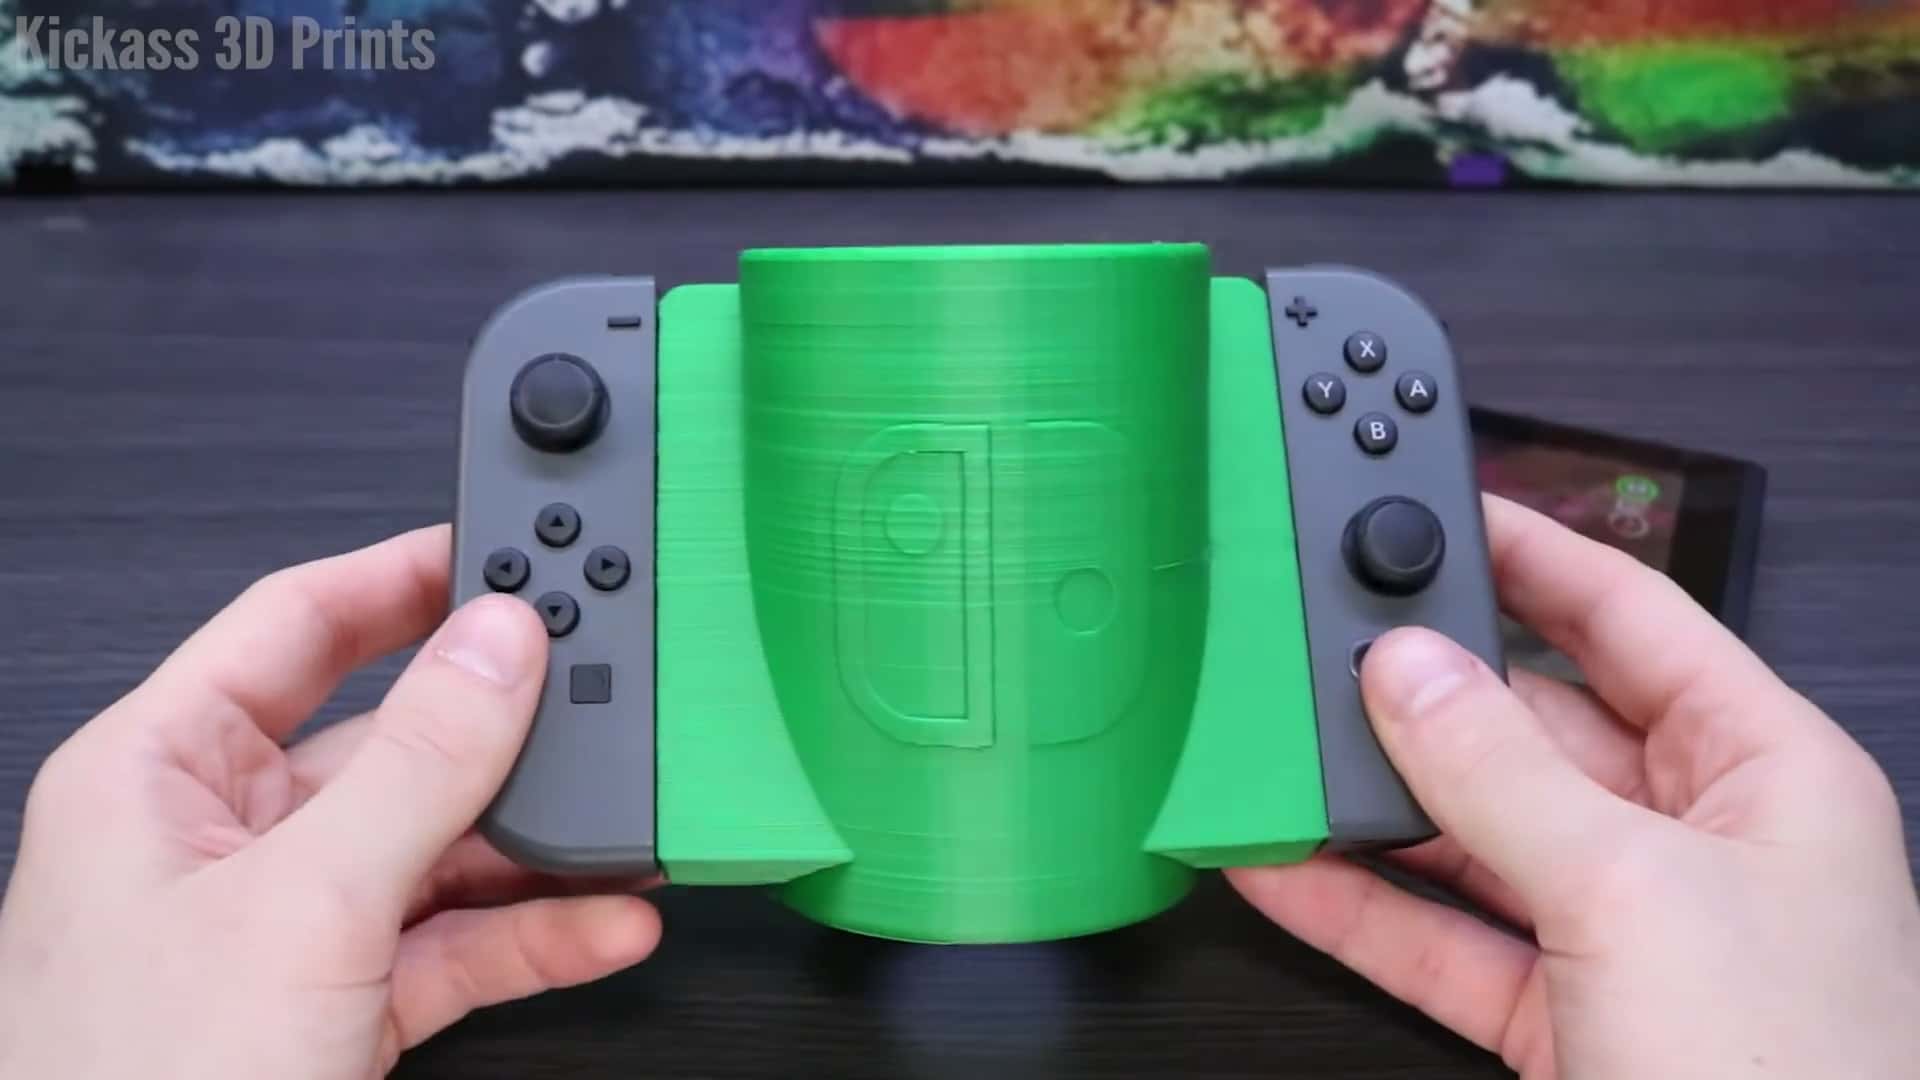 10 3D Printed Accessories for Nintendo Switch Video Games — Anet 3D Printer